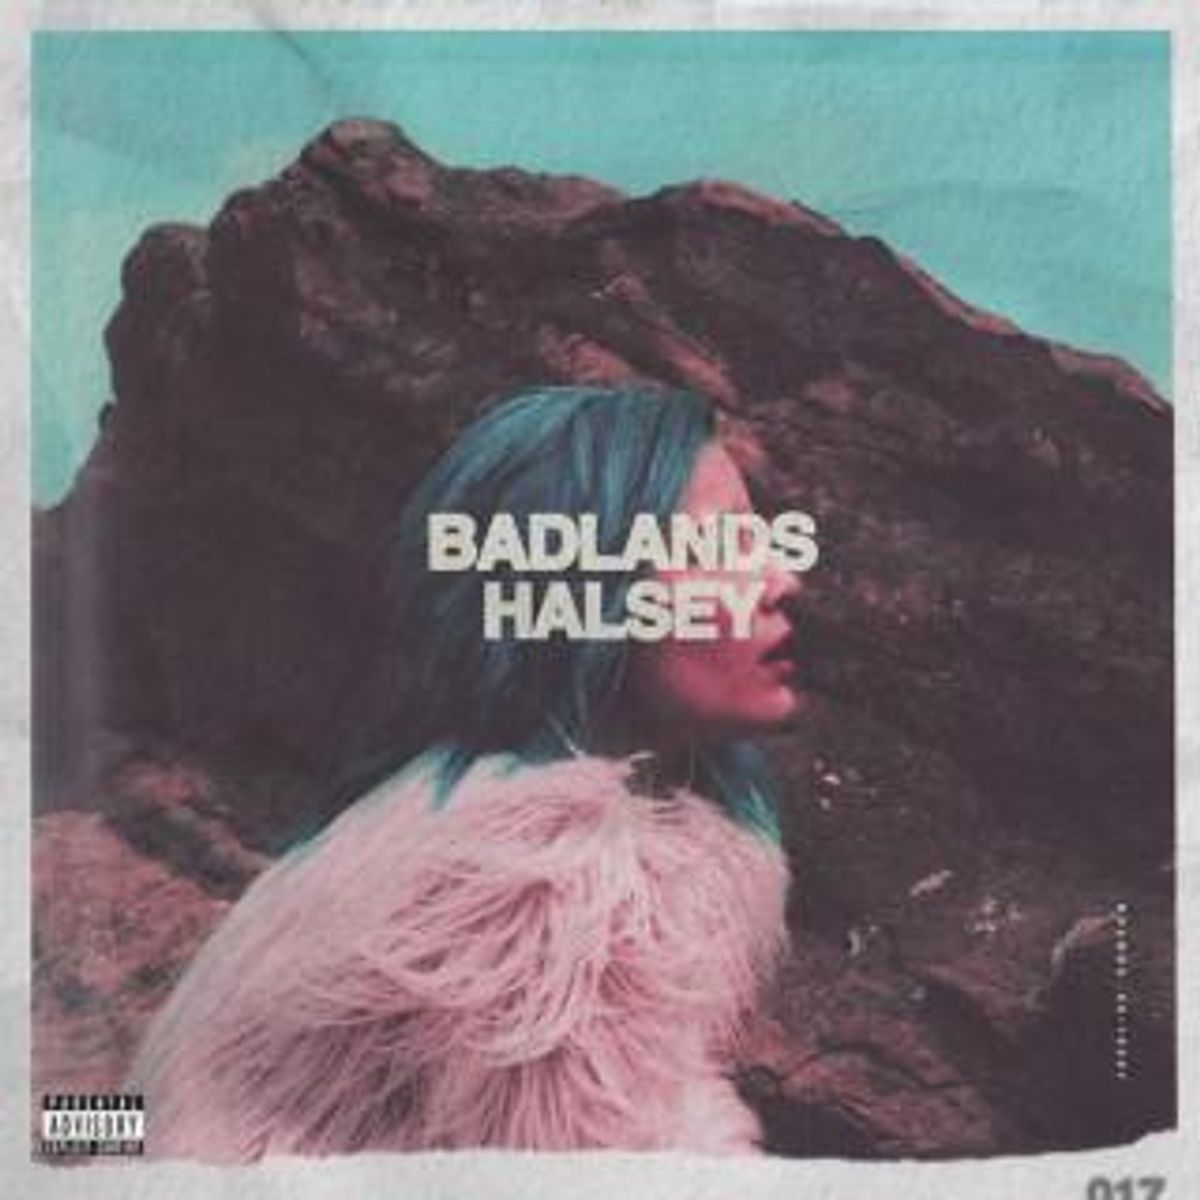 10 Halsey Songs To Make You Feel Like A Strong Woman